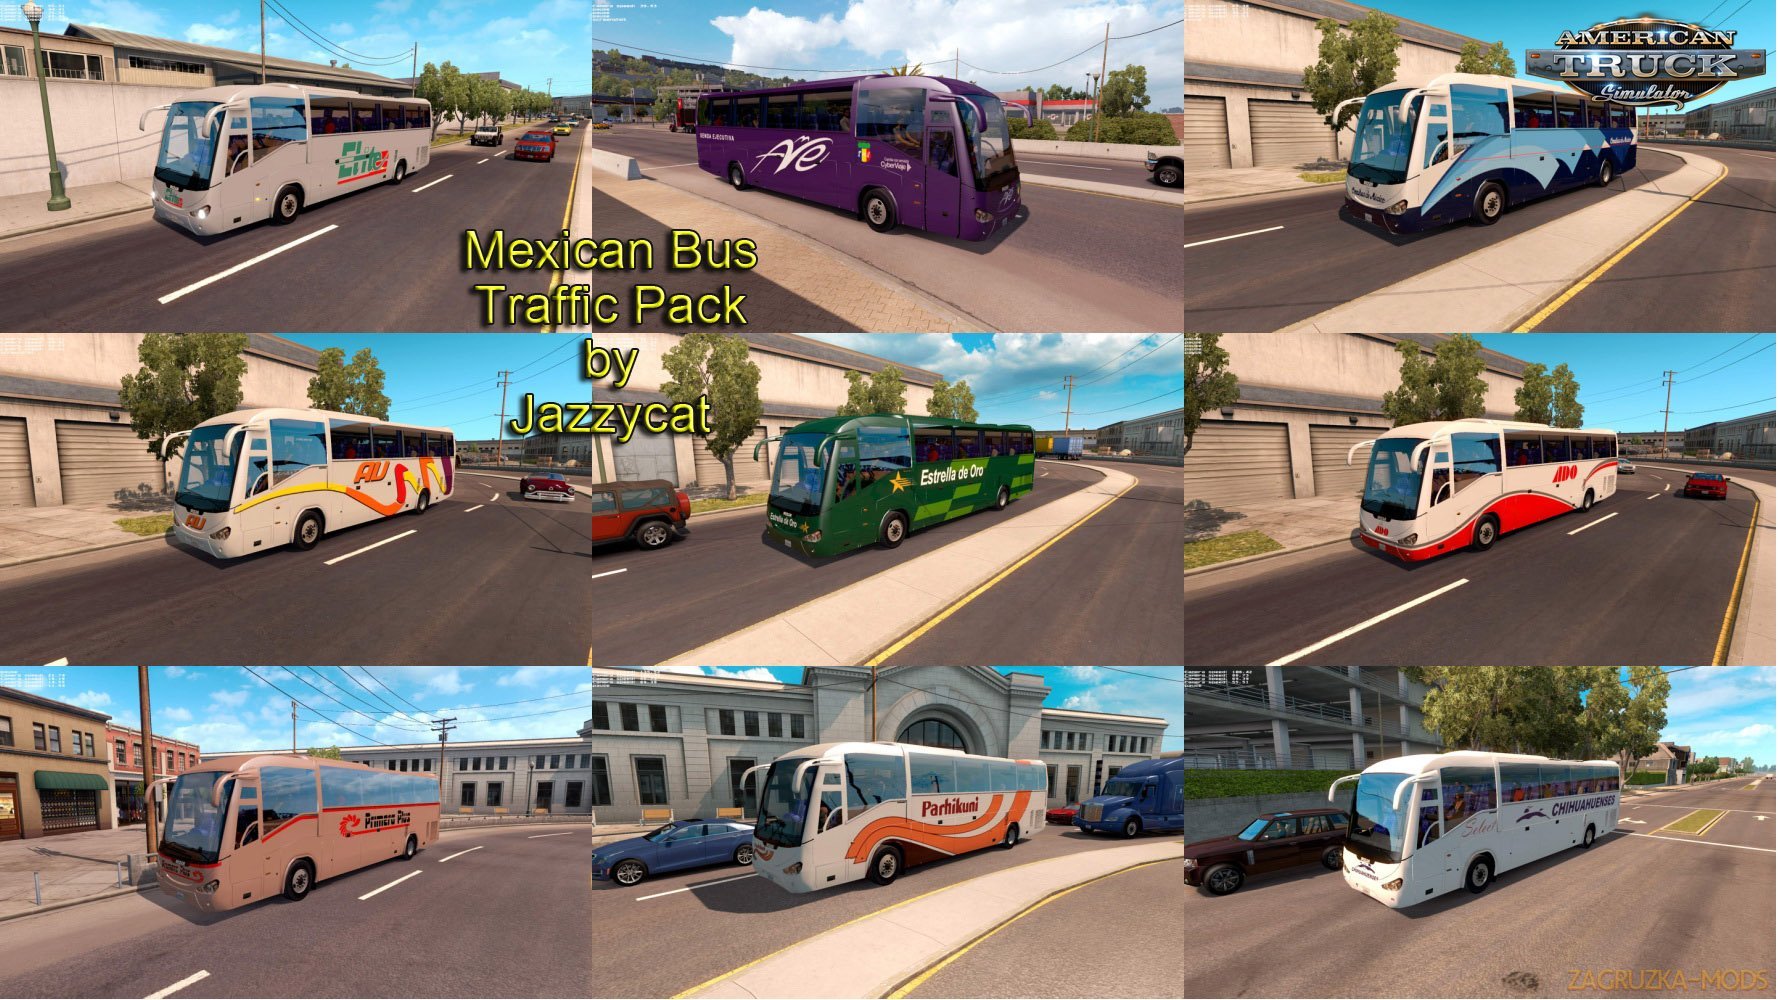 Mexican Bus Traffic Pack v1.0 by Jazzycat